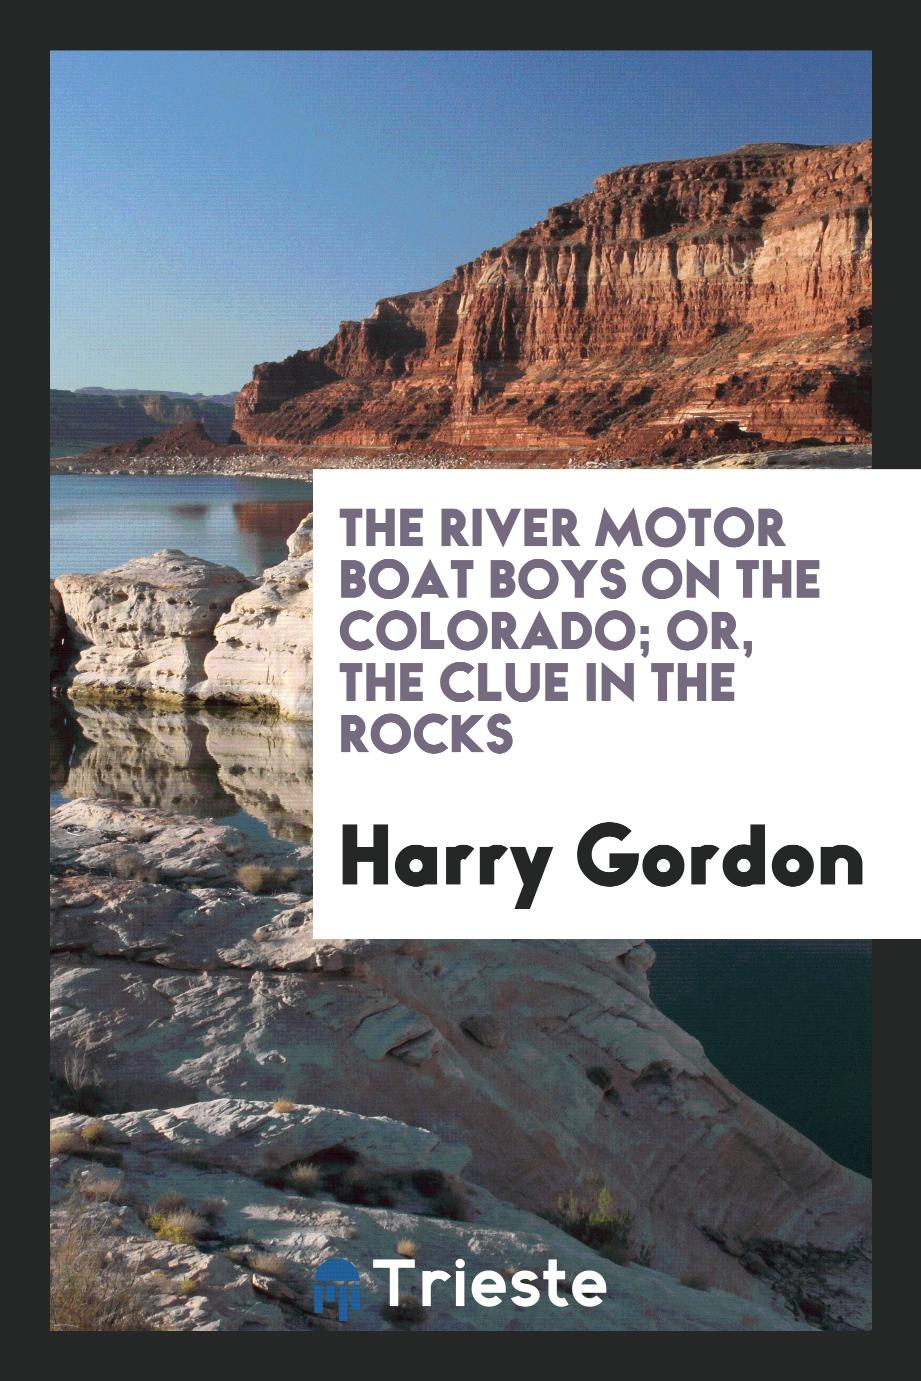 The river motor boat boys on the Colorado; or, The clue in the rocks